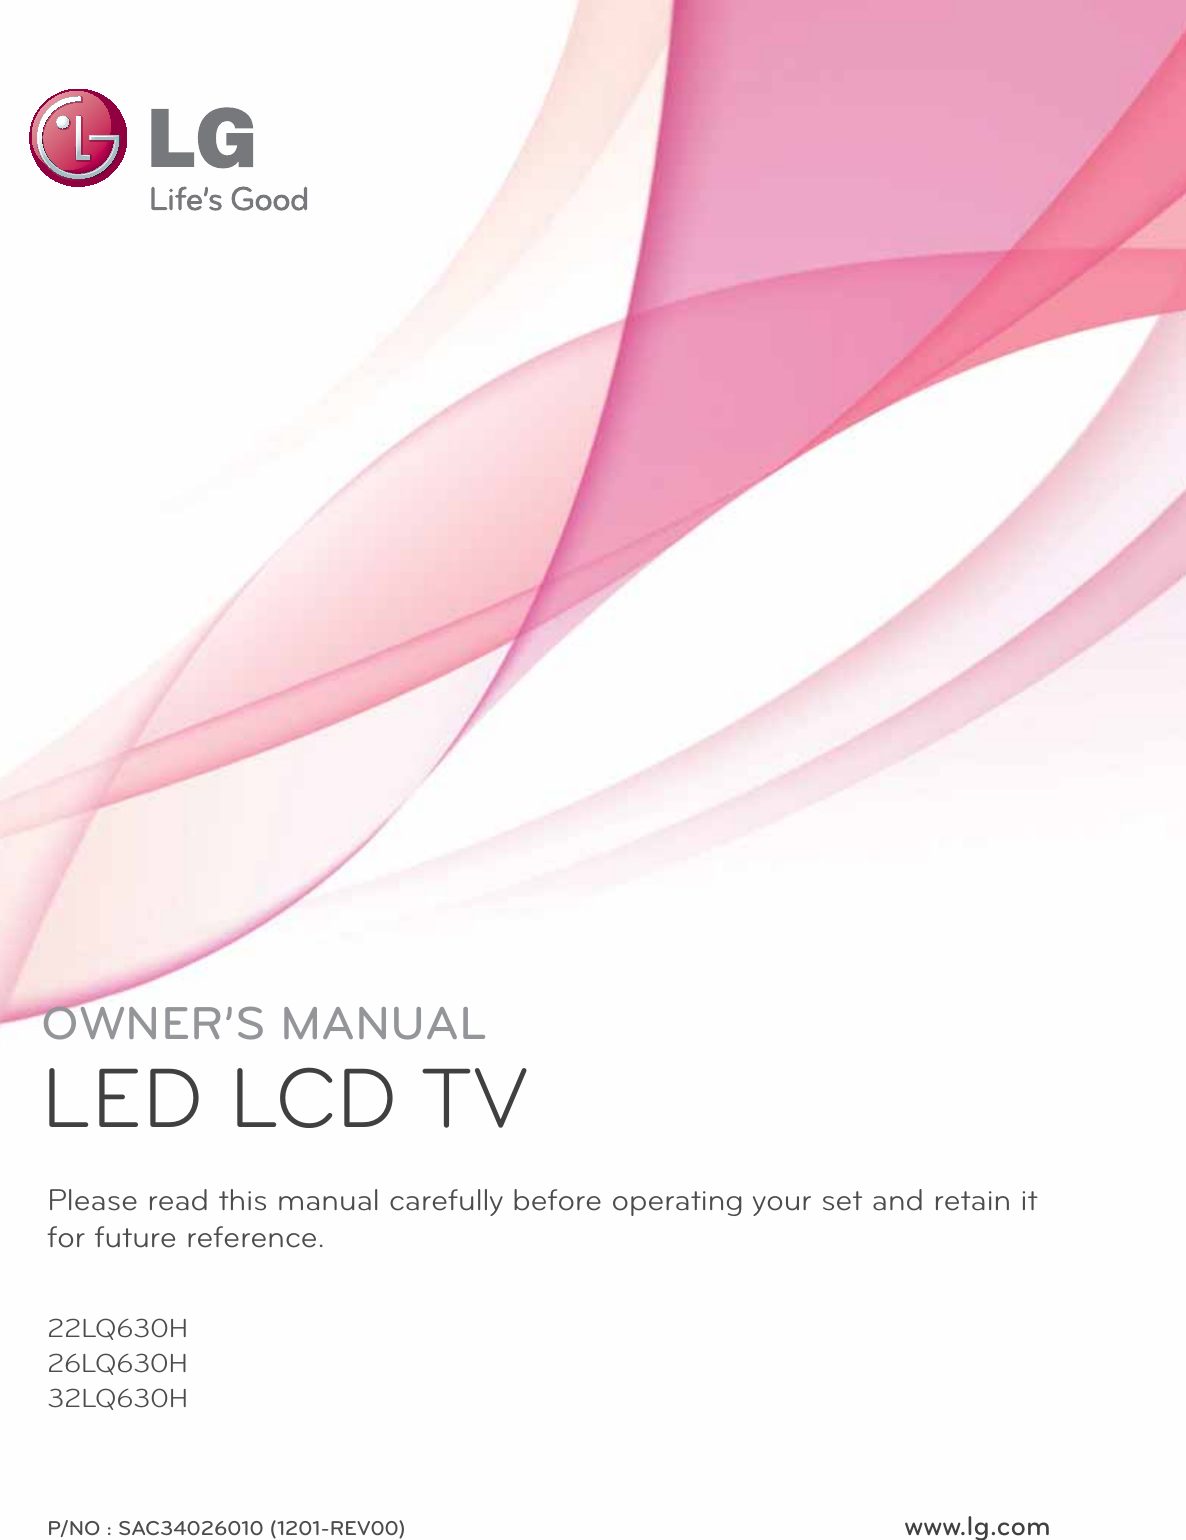 www.lg.comPlease read this manual carefully before operating your set and retain it for future reference.22LQ630H26LQ630H32LQ630HP/NO : SAC34026010 (1201-REV00)OWNER’S MANUALLED LCD TV